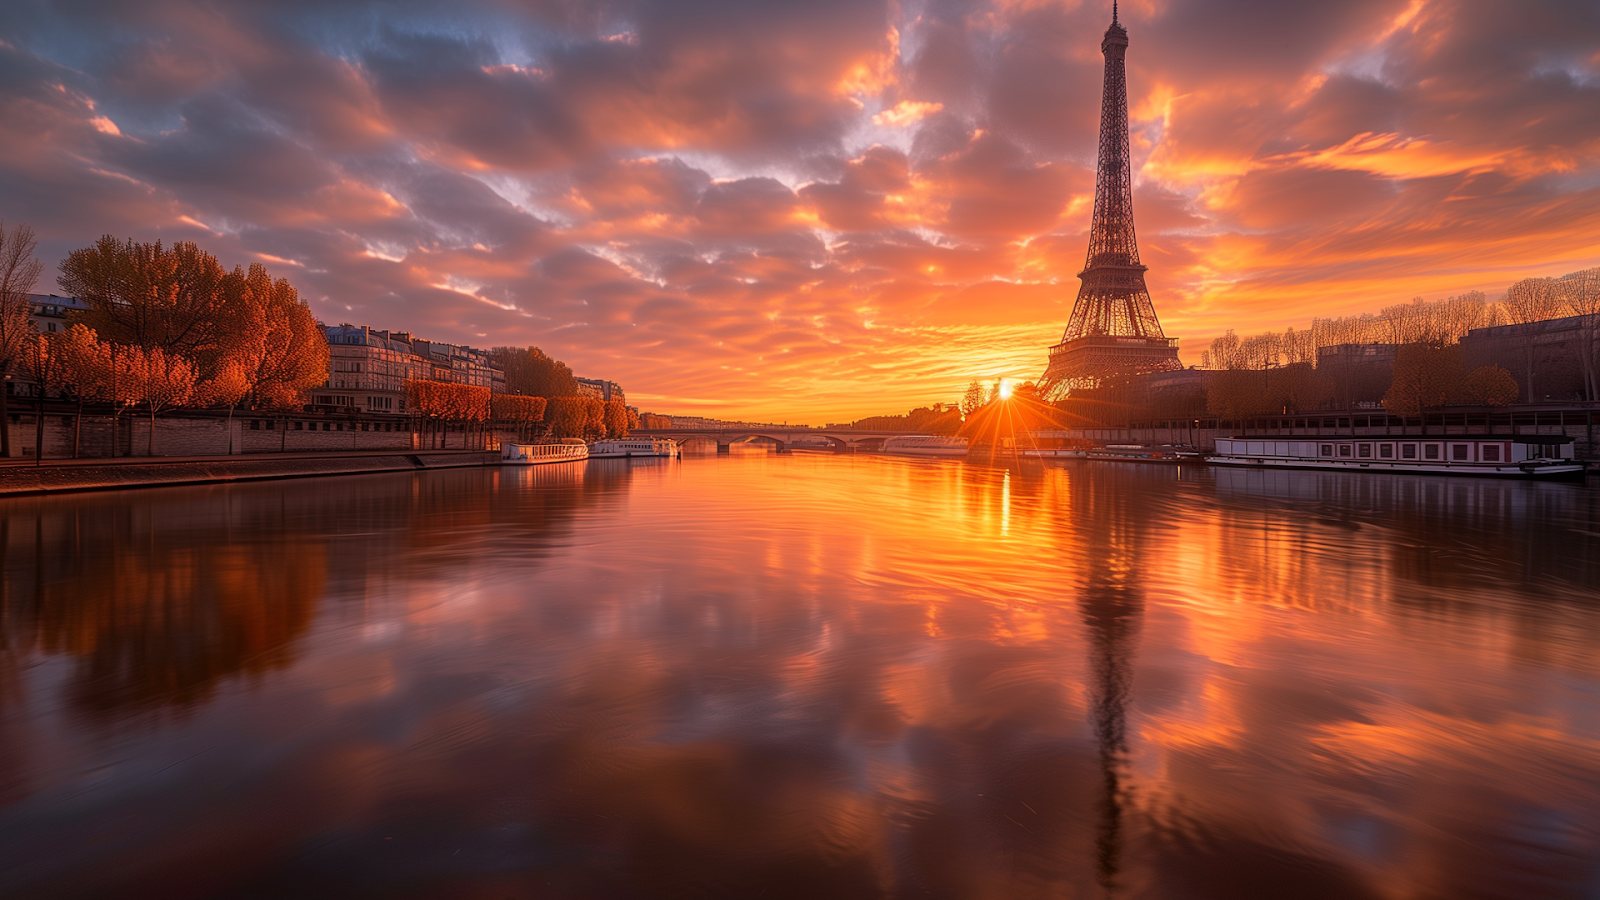 Serene sunrise over the Seine River with the Eiffel Tower in the background, highlighting Parisian luxury and artistic elegance.